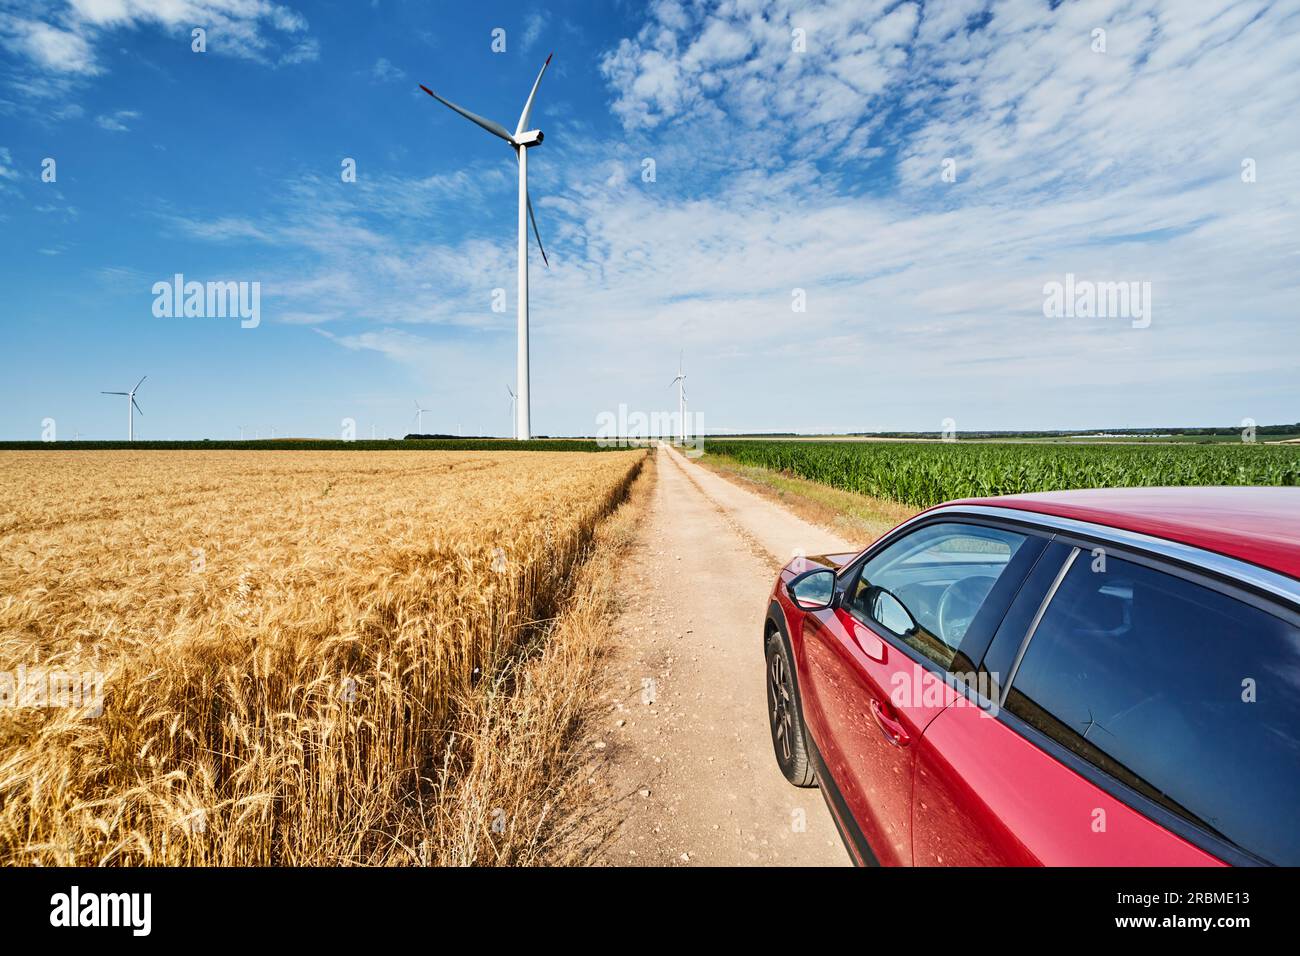 Rural landscape with wind turbines, country road among crops field and red car Stock Photo